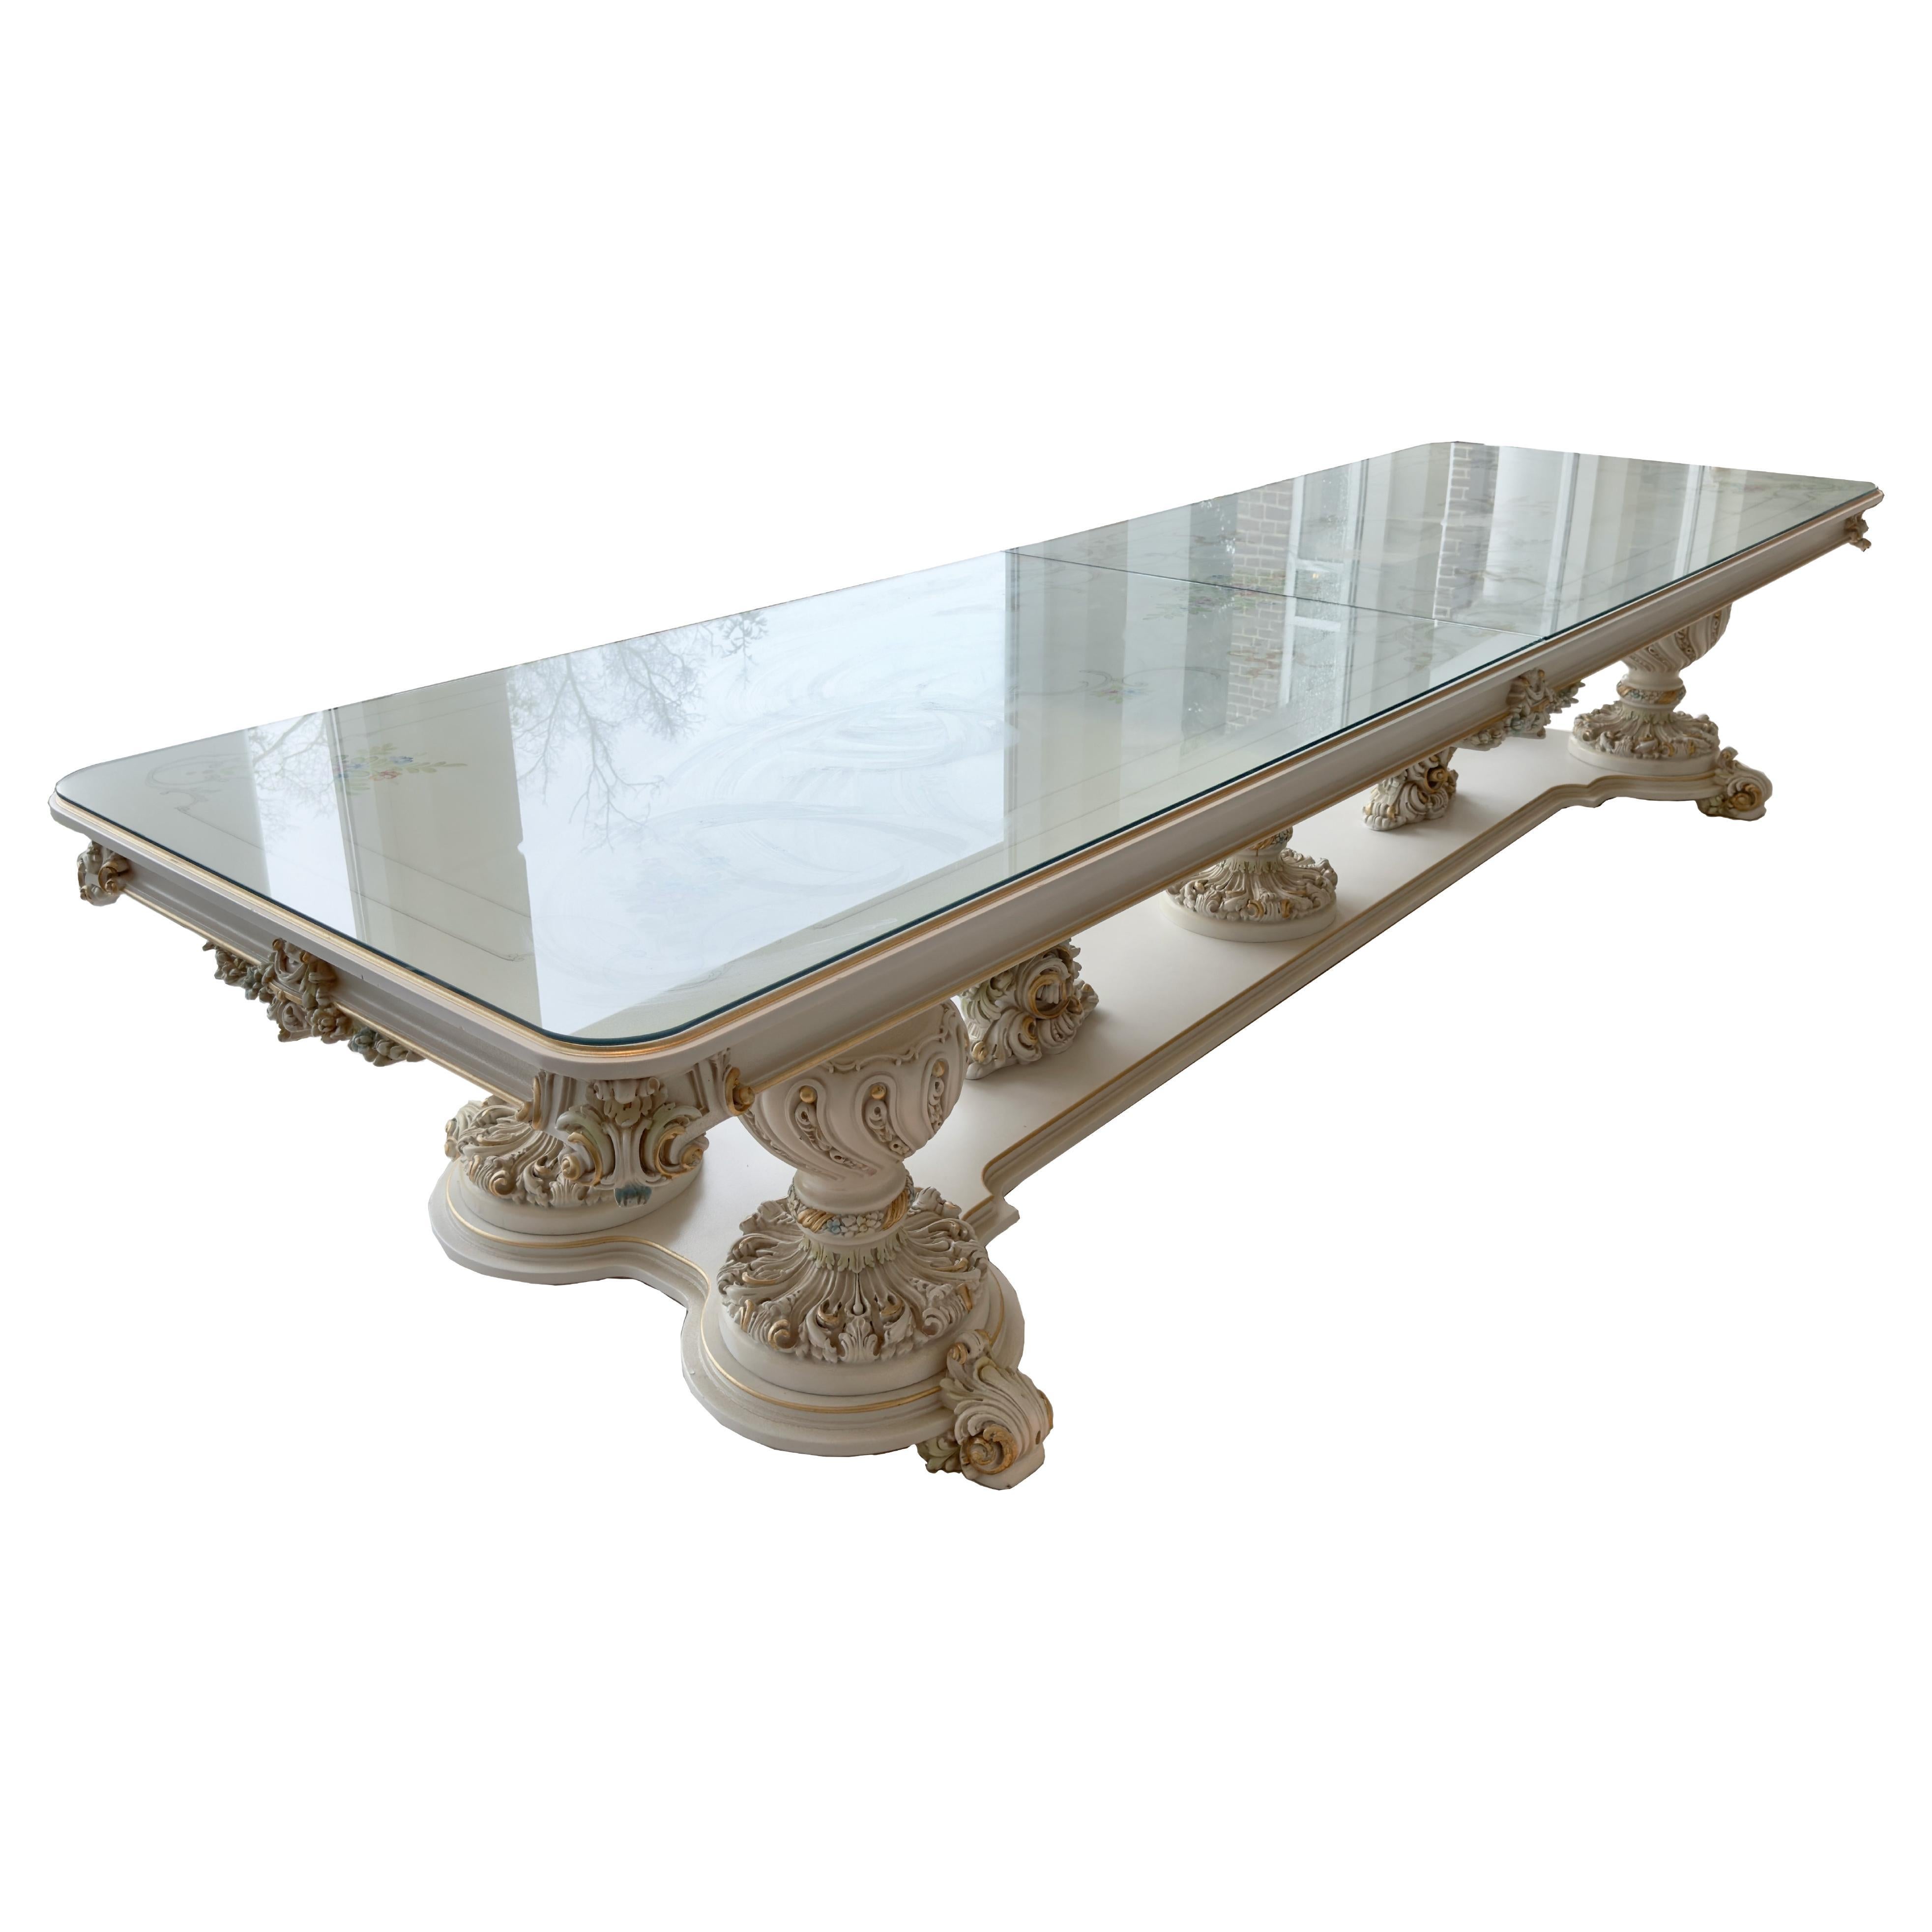 Monumental Italian Neoclassical Baroque Style Dining Table with Glass Top  For Sale